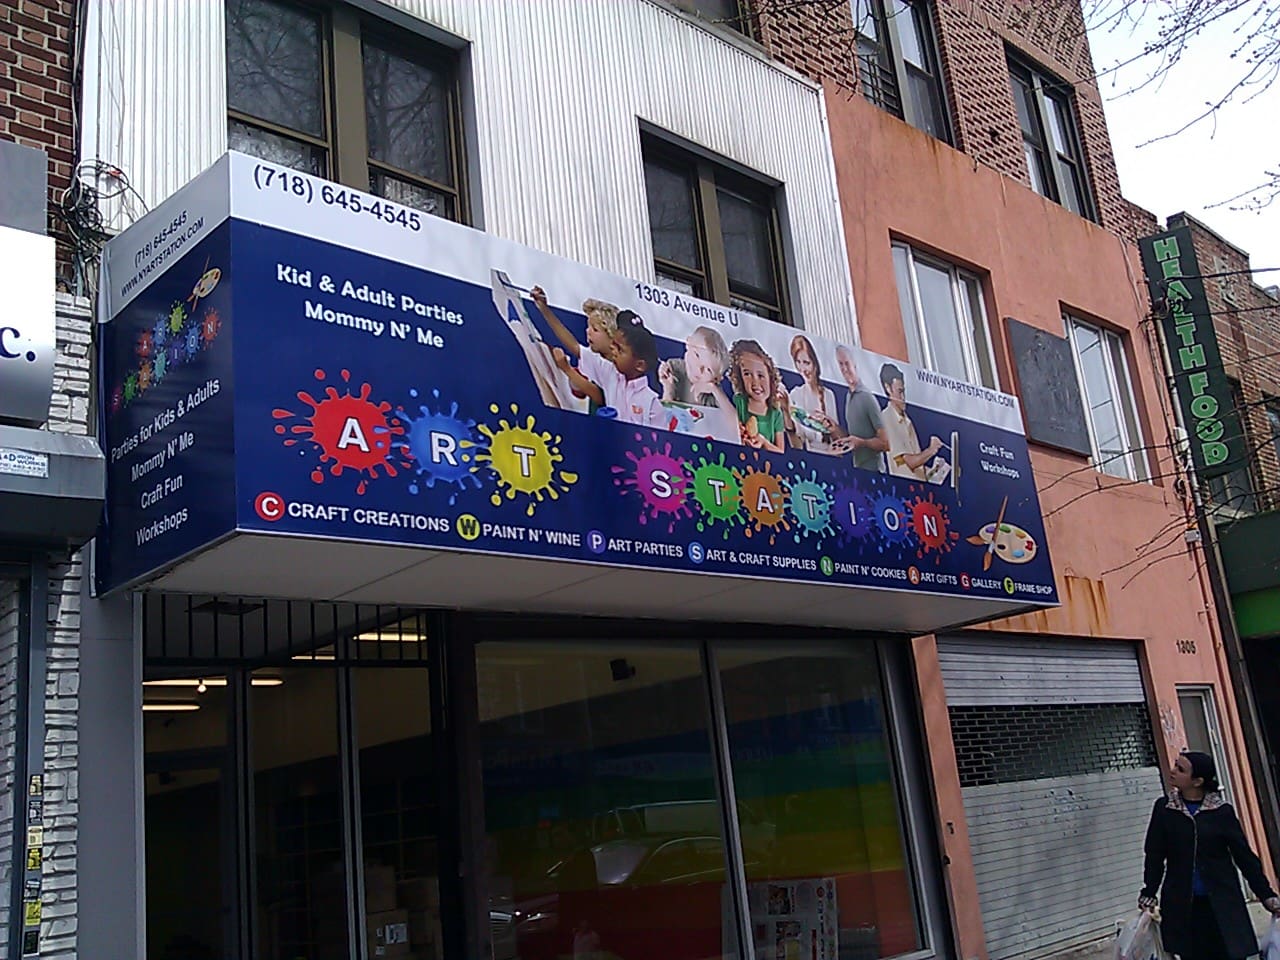 Storefront of ADP USA Solutions Gallery with colorful sign featuring images of children painting, contact number, and various service offerings listed.